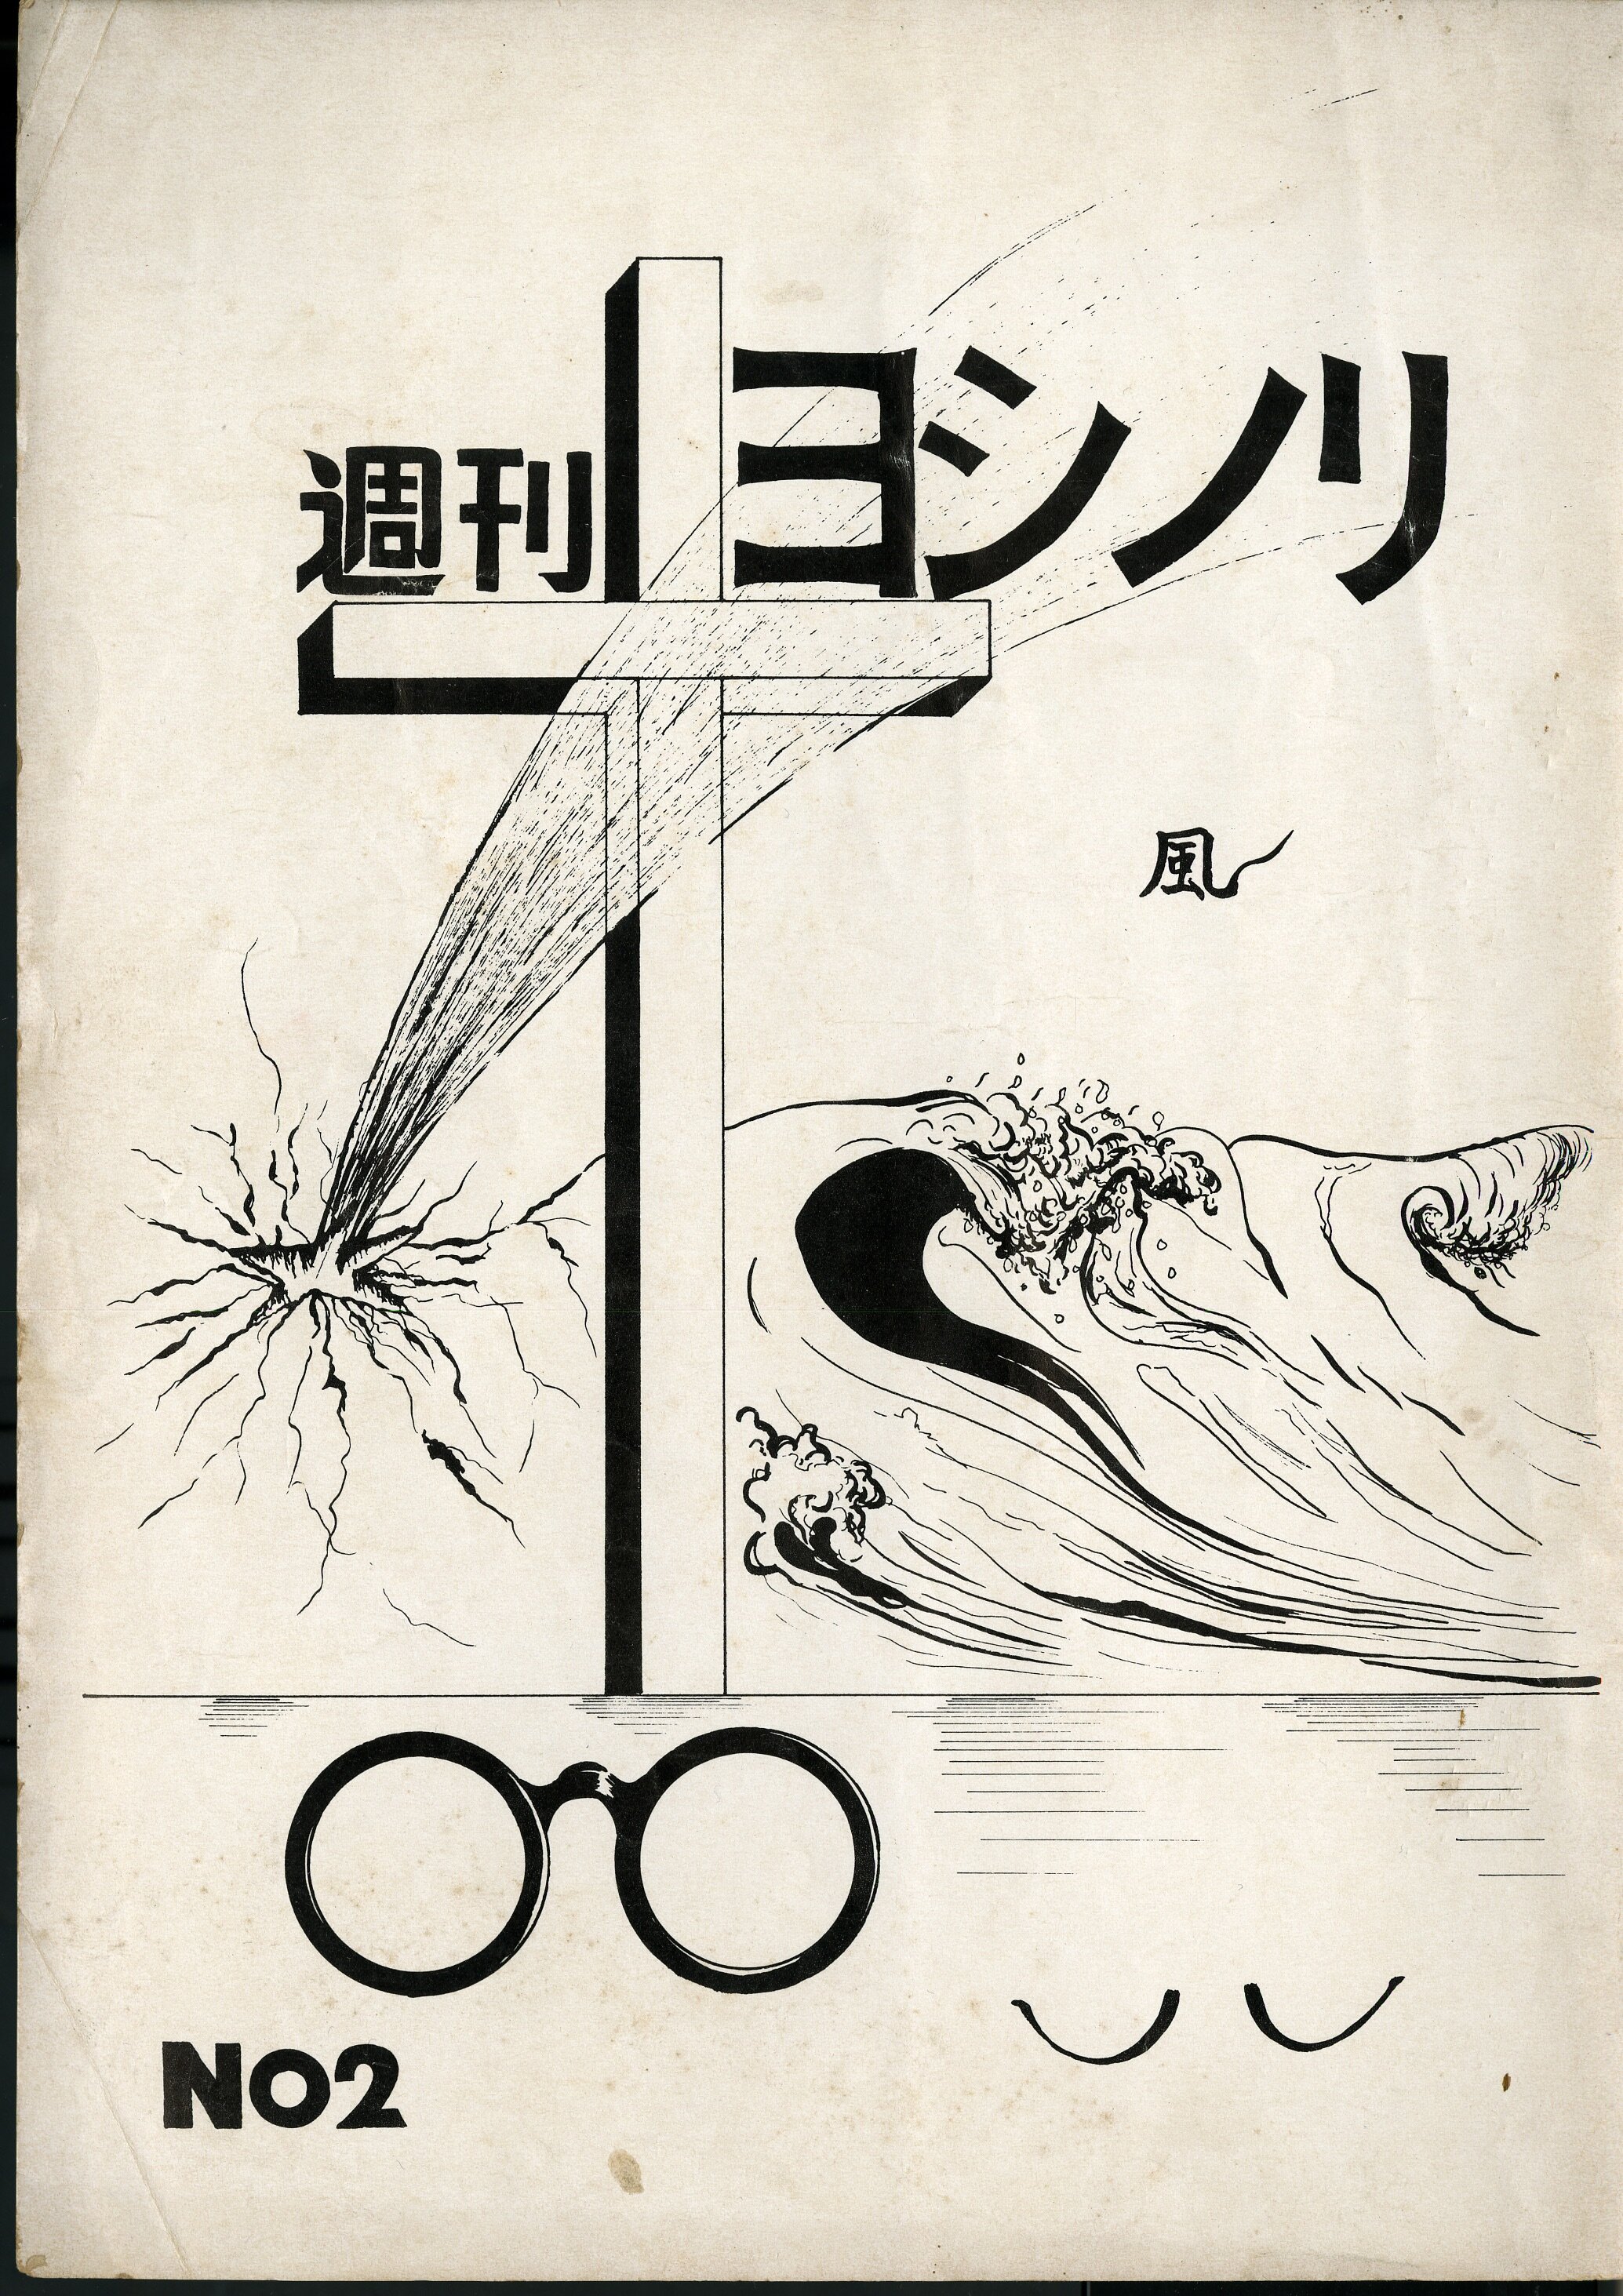  Front cover of journal published by VAN Film Science Research Center, Weekly Yoshinori, No. 2, 1971 Scanned reference material. Collection of Mineko Jonouchi 